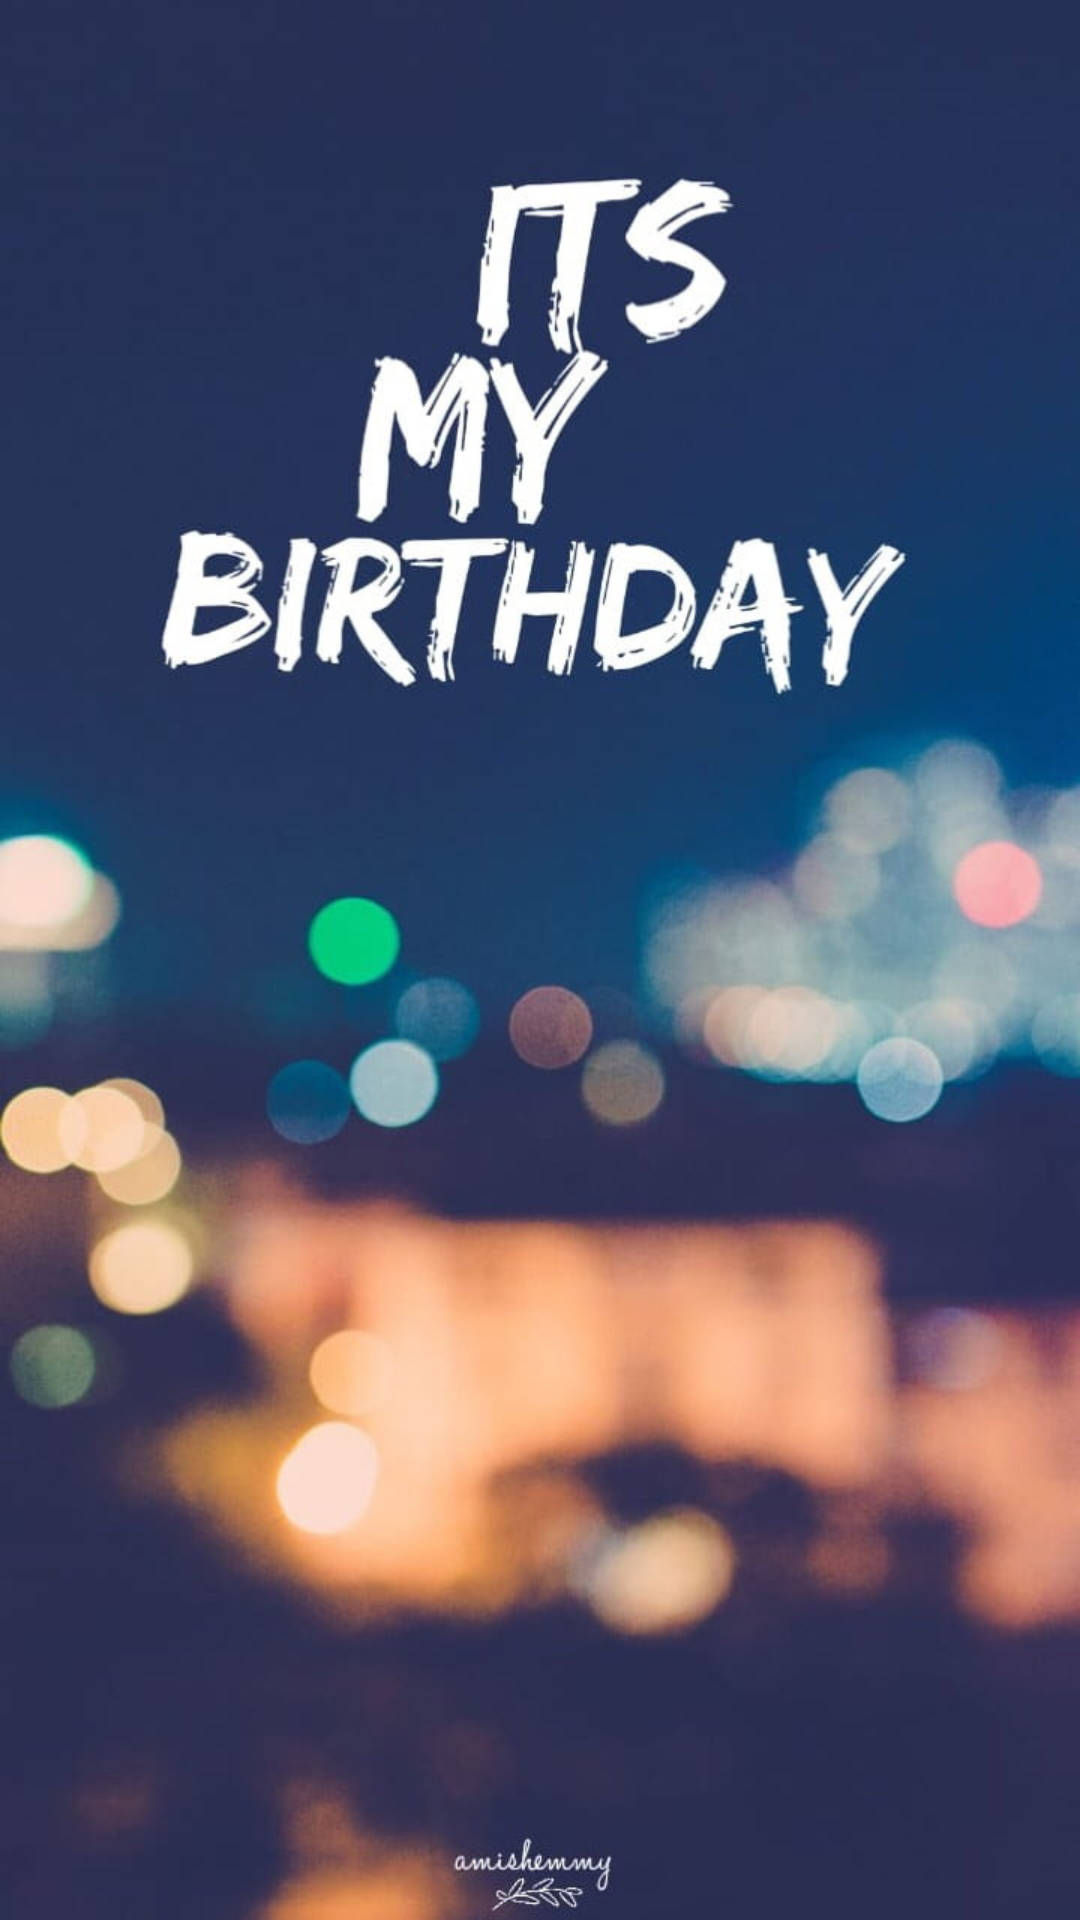 Download Greeting Card Saying “it's My Birthday” Wallpaper 